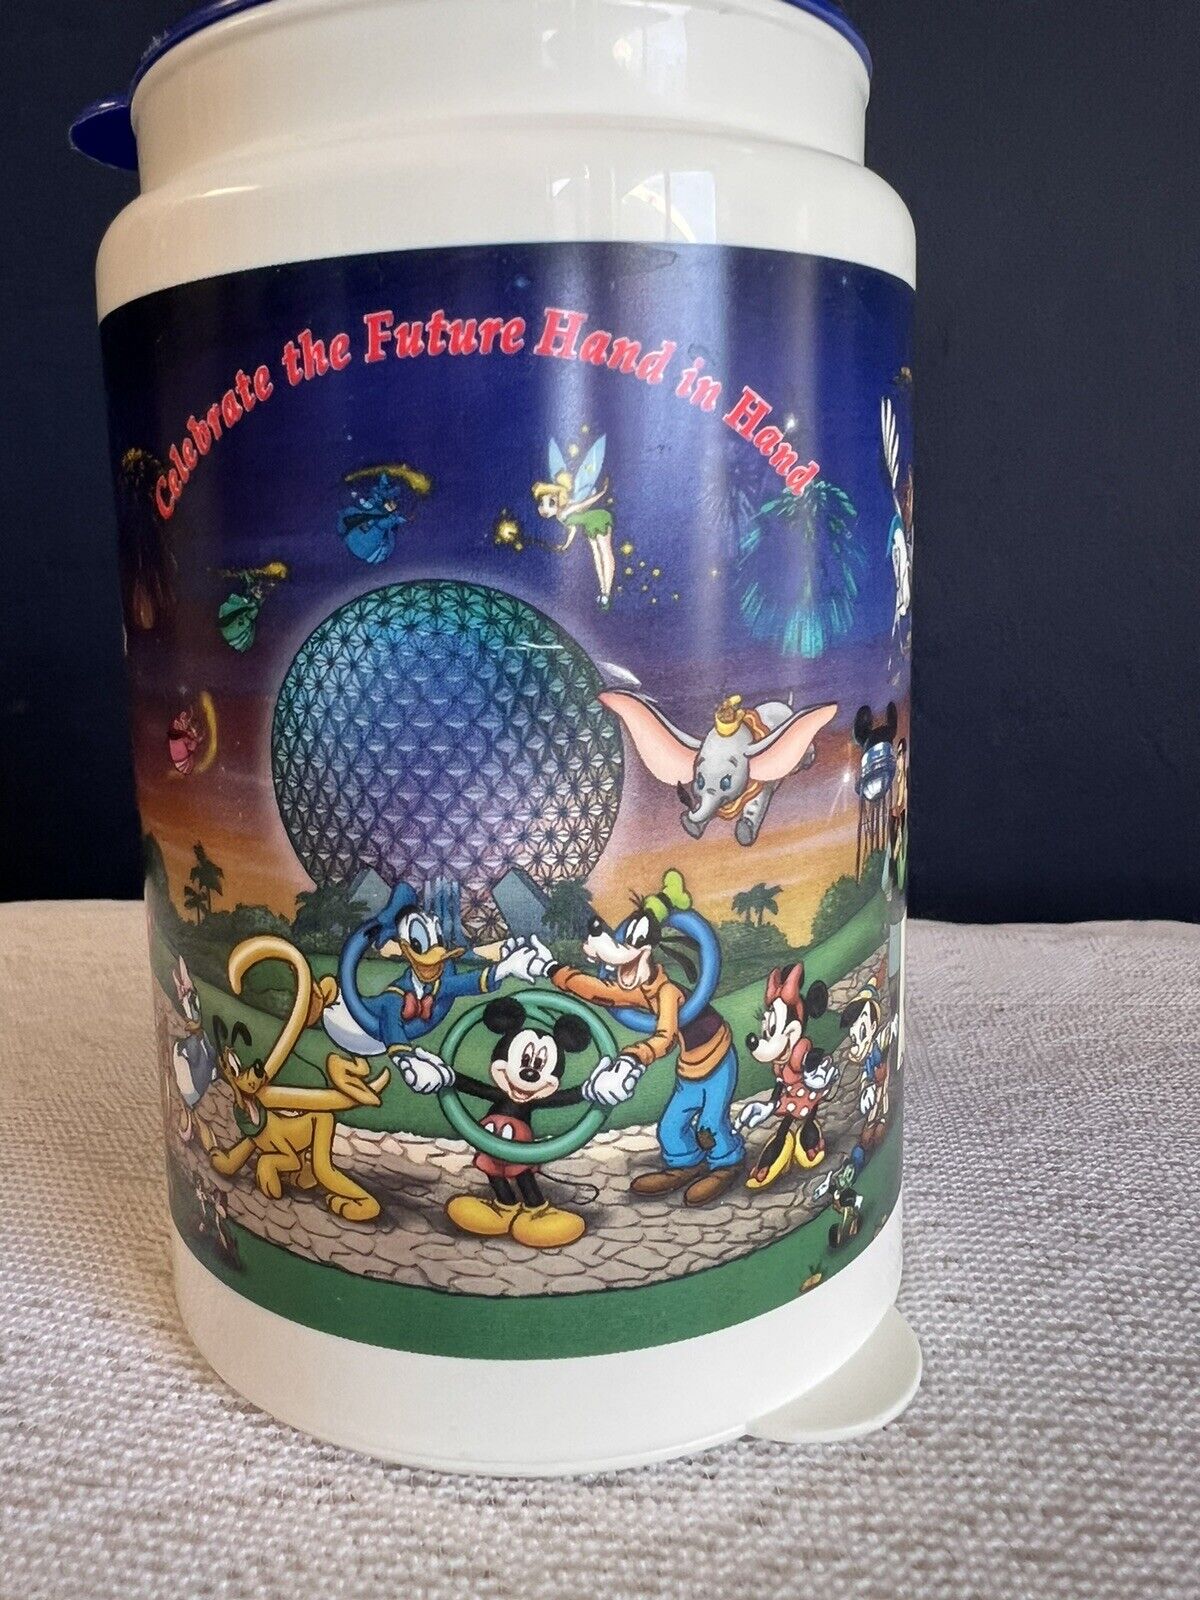 Vintage 2000 DISNEY Celebrate the Future Hand in Hand Insulated Refillable Mug